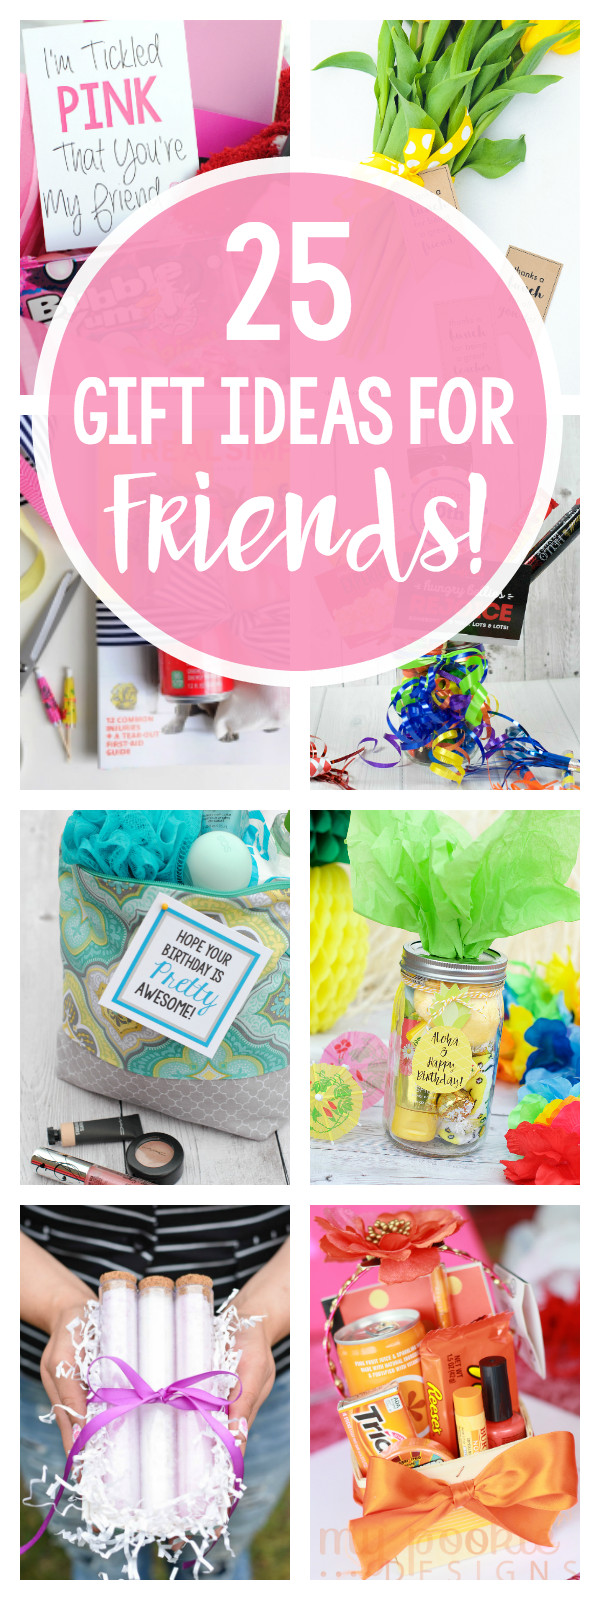 Cute Birthday Gift Ideas For Friend
 25 Fun Gifts for Best Friends for Any Occasion – Fun Squared